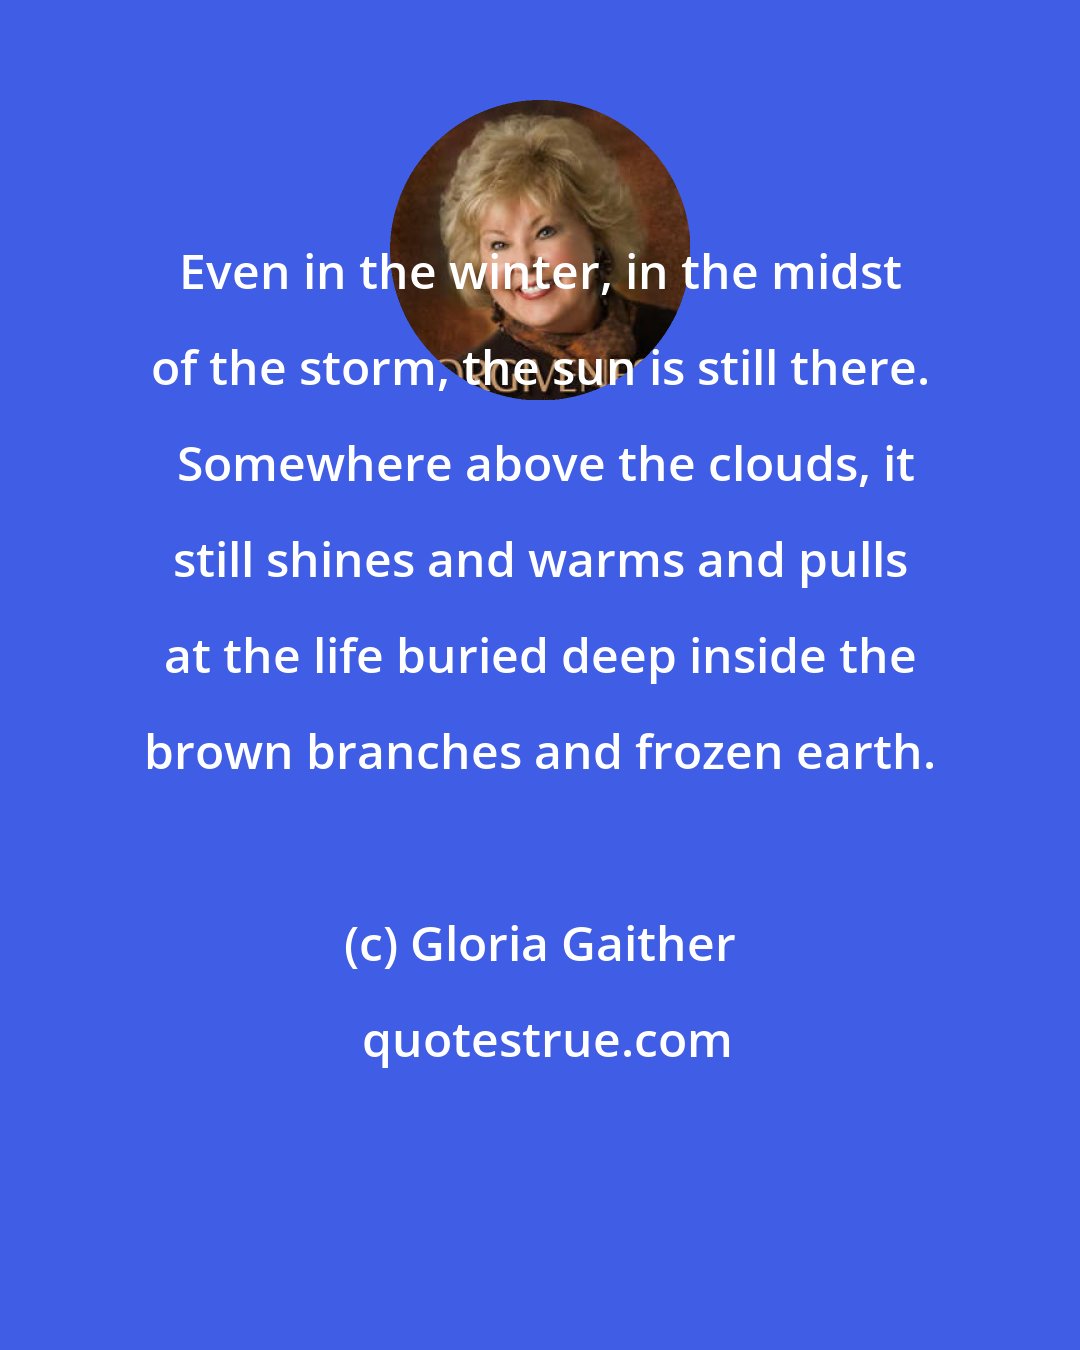 Gloria Gaither: Even in the winter, in the midst of the storm, the sun is still there.  Somewhere above the clouds, it still shines and warms and pulls at the life buried deep inside the brown branches and frozen earth.